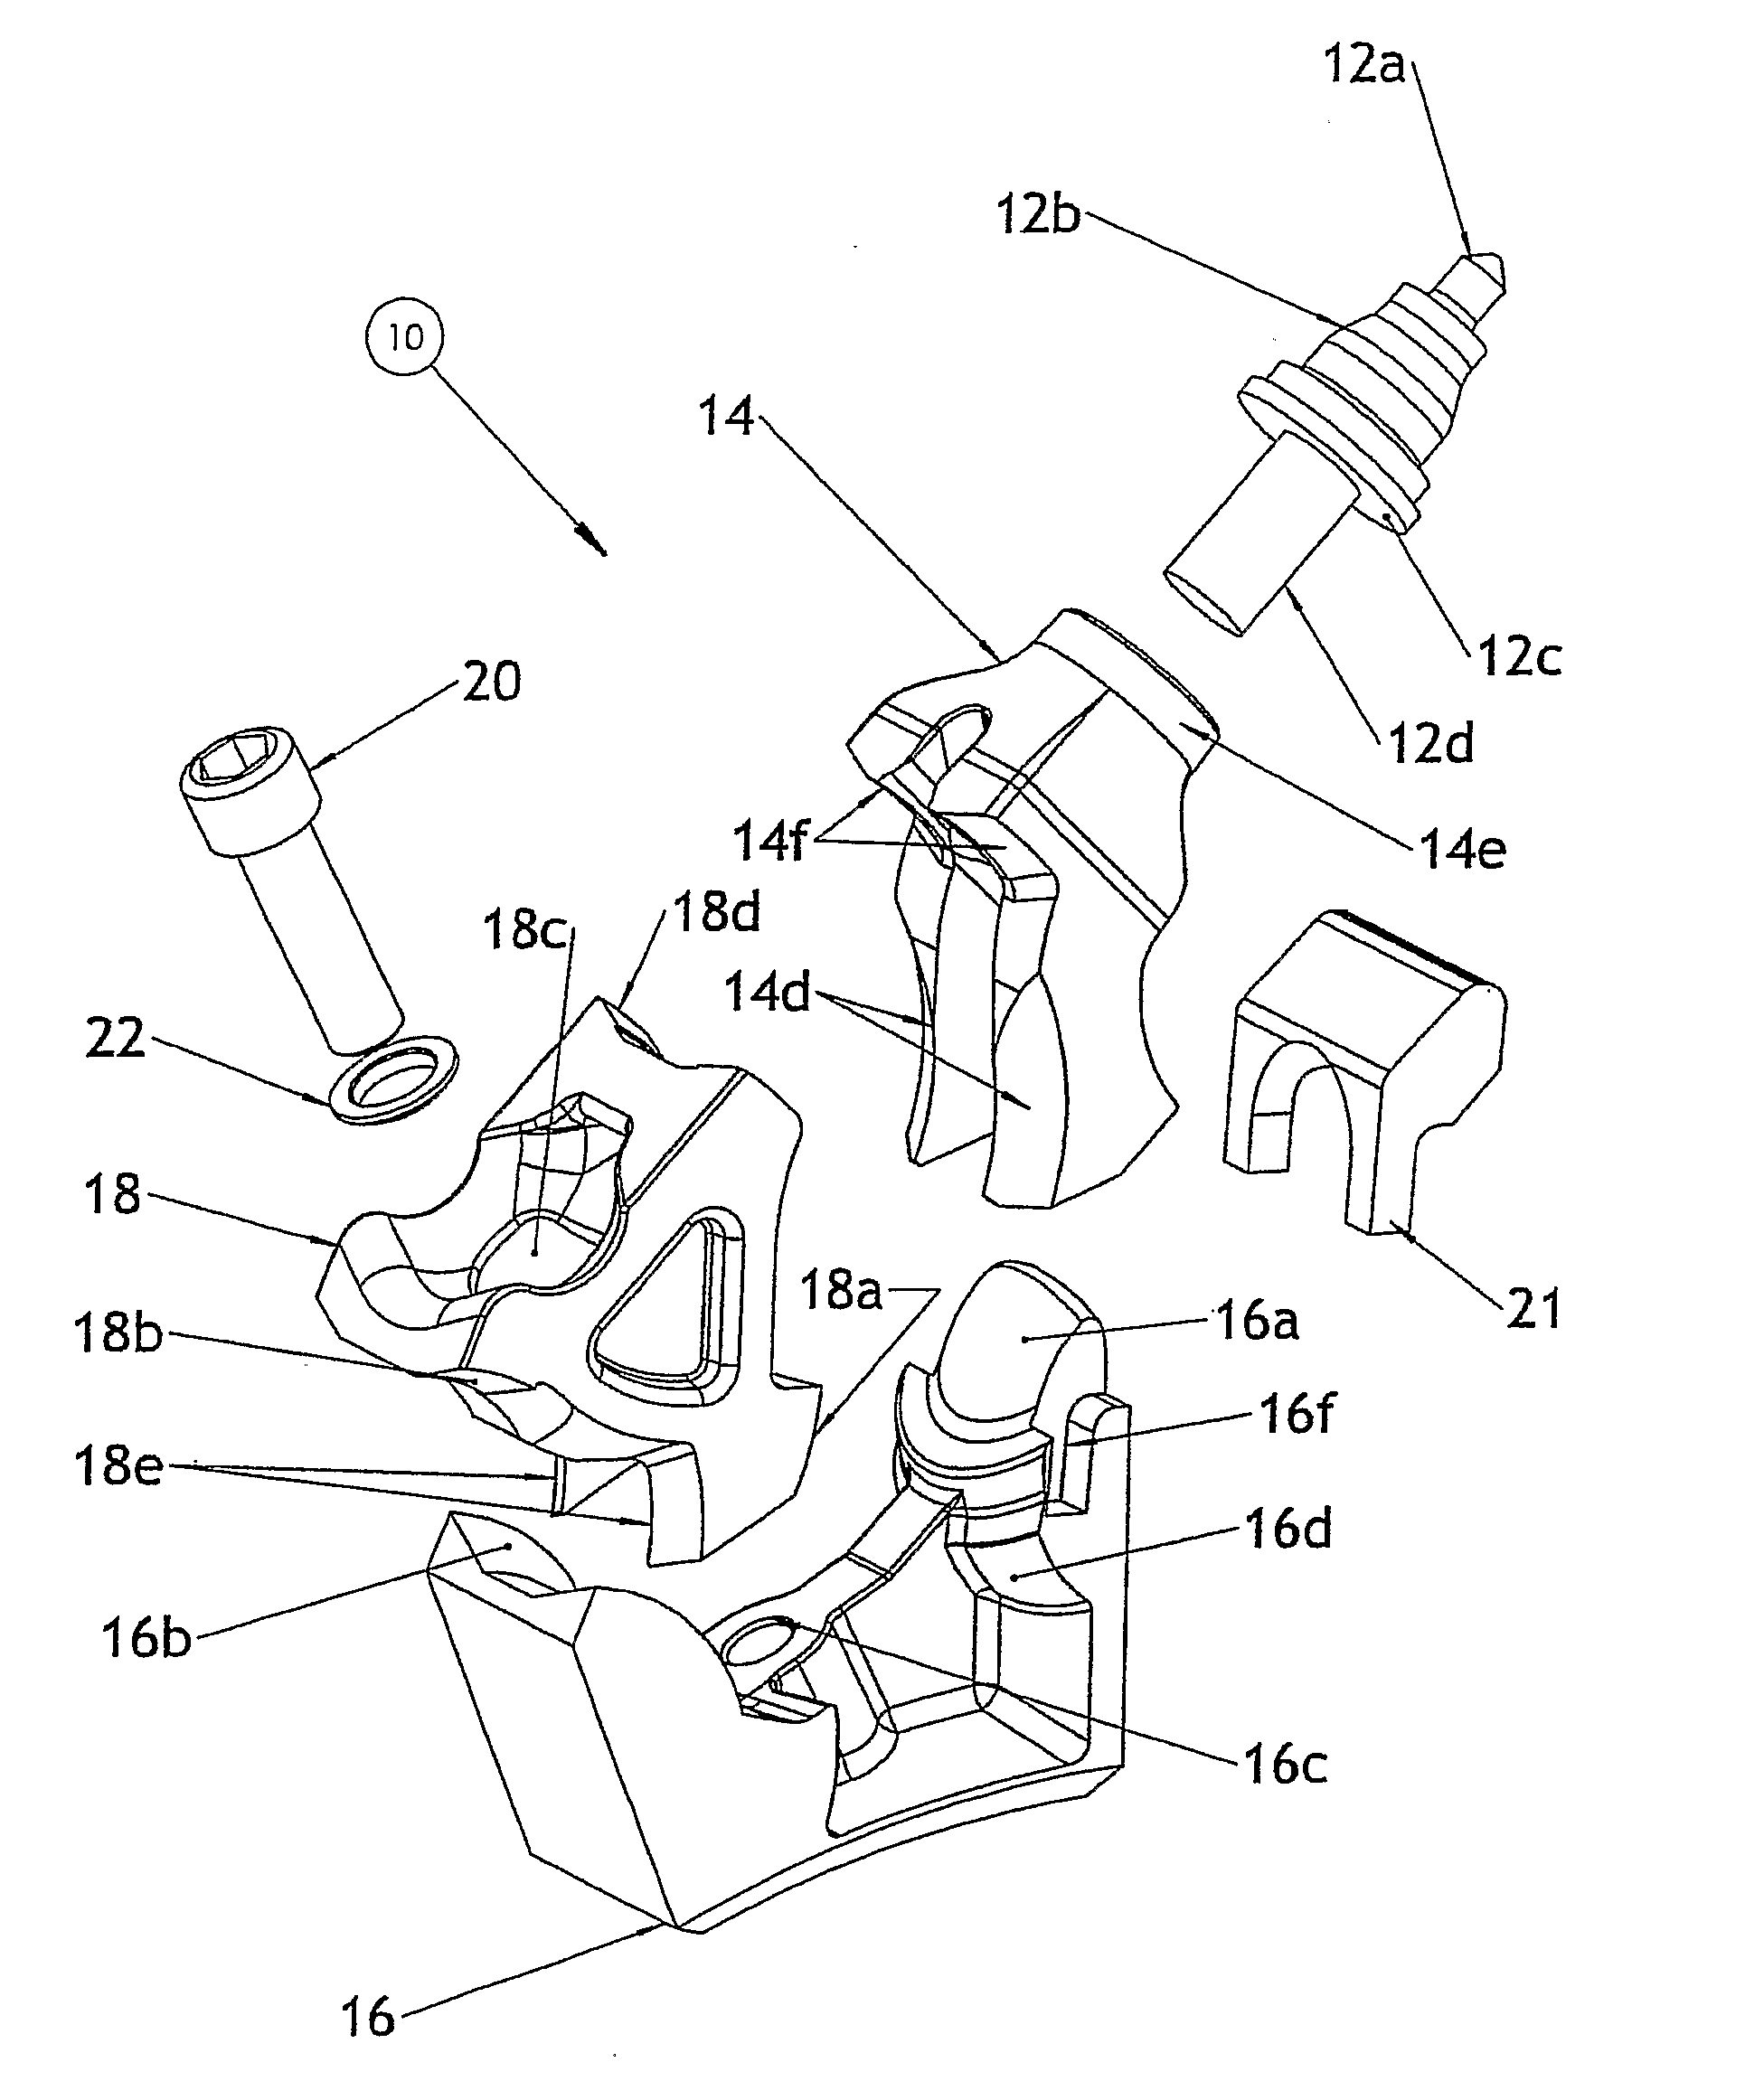 Cutting Tool Holding Apparatus And Method Of Use